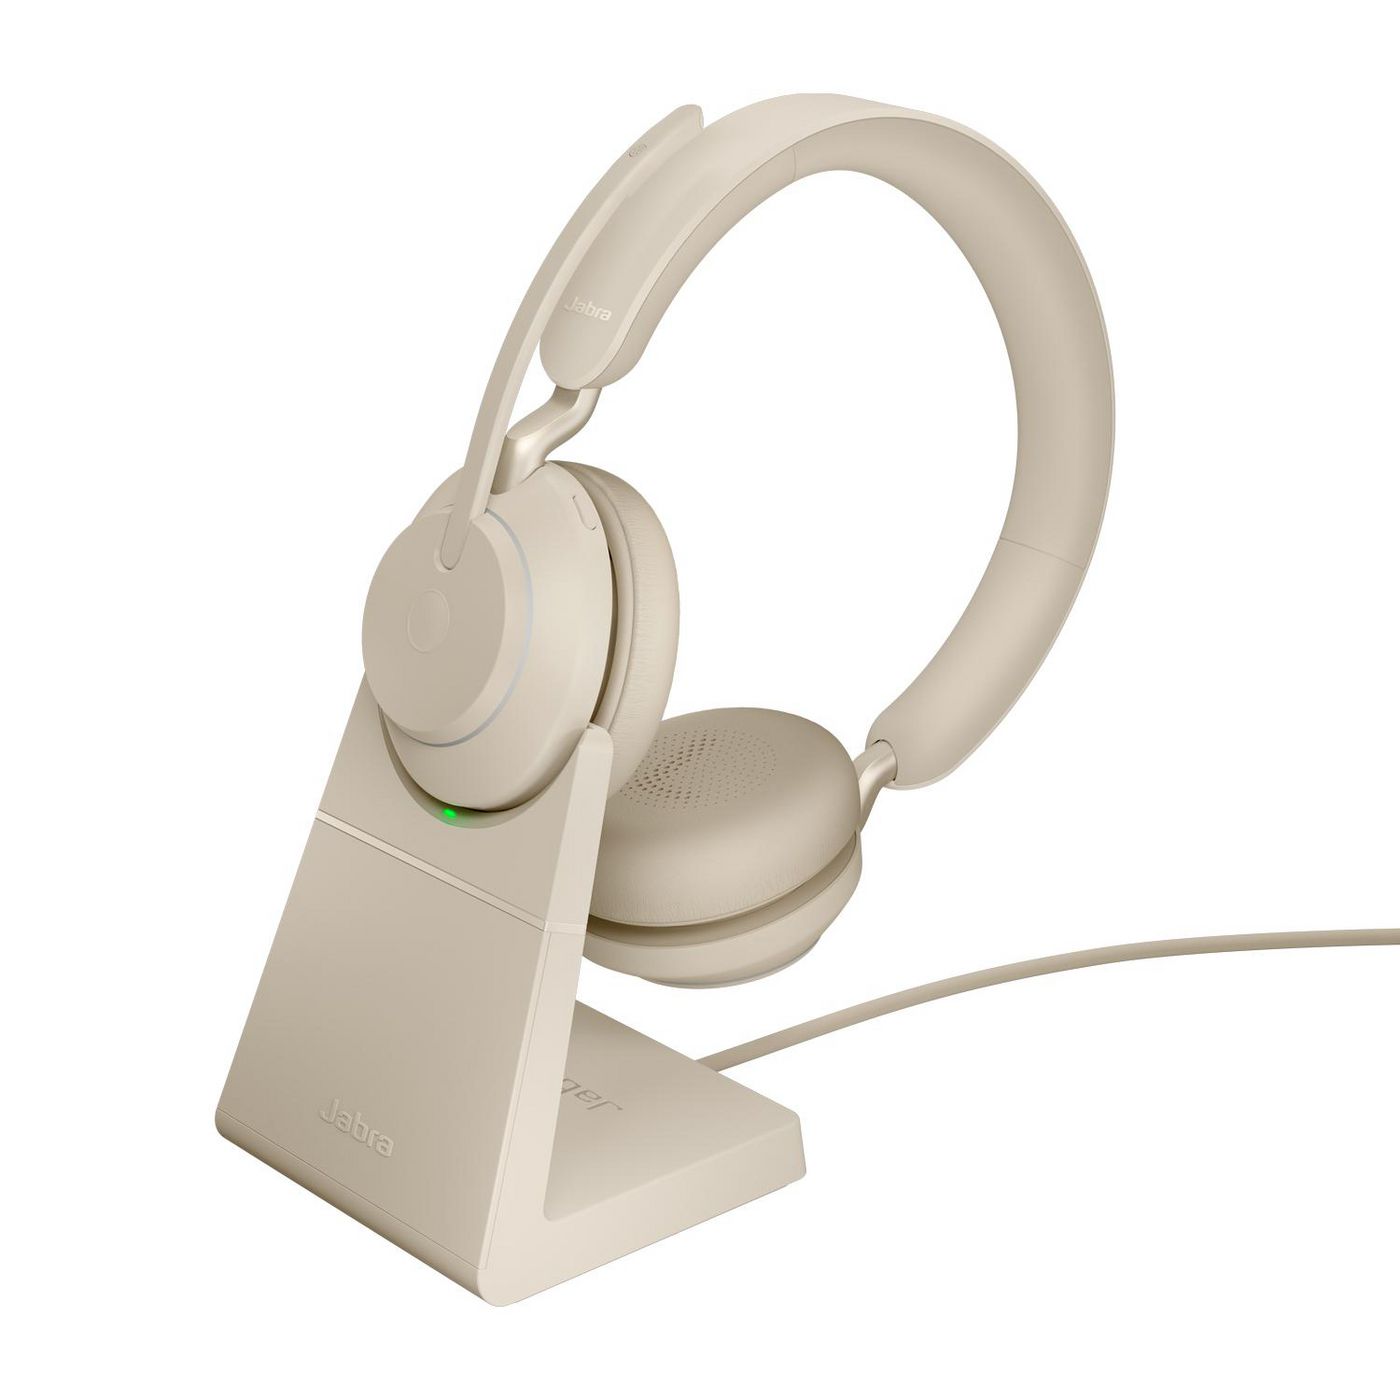 Headset Evolve2 65 UC - Stereo - USB-C / BT - Beige - with Desk Stand